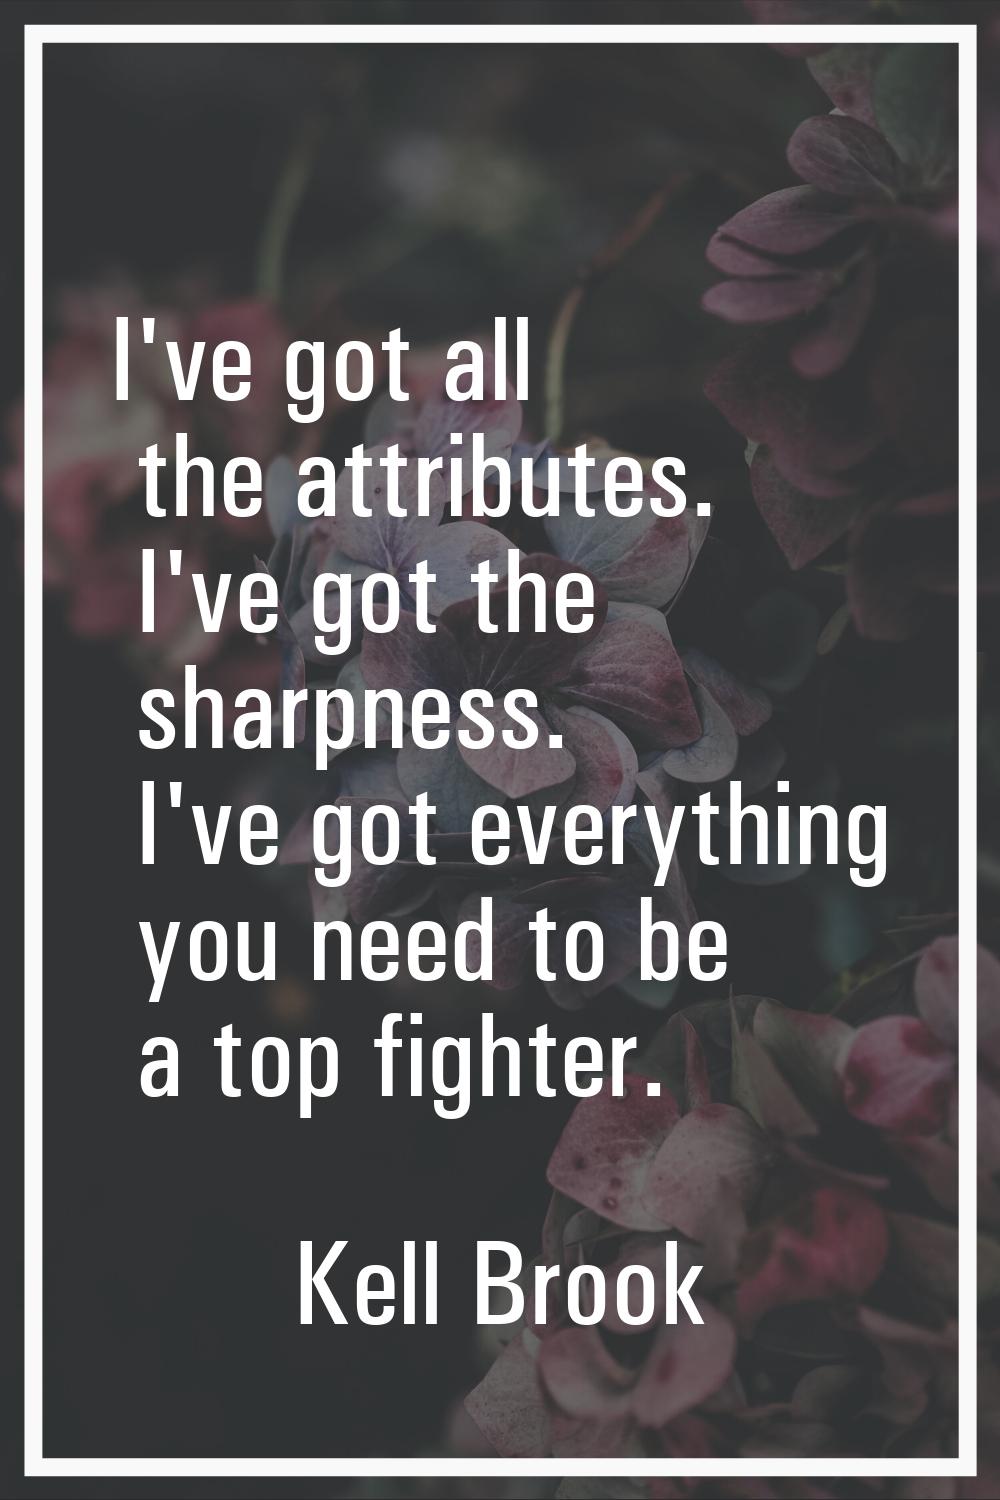 I've got all the attributes. I've got the sharpness. I've got everything you need to be a top fight